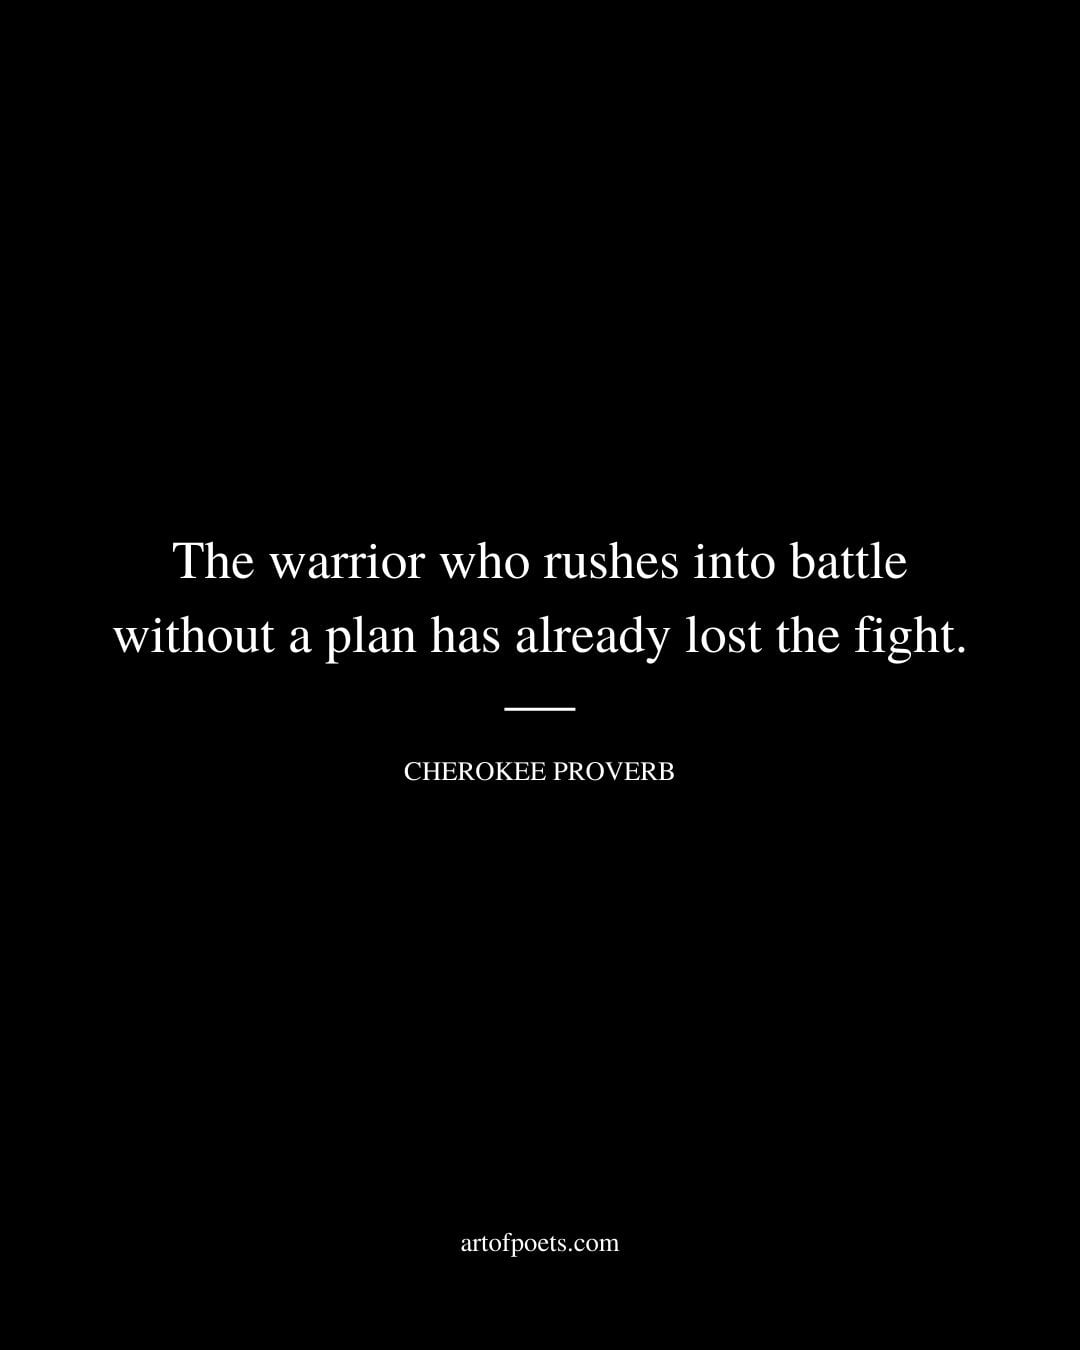 The warrior who rushes into battle without a plan has already lost the fight